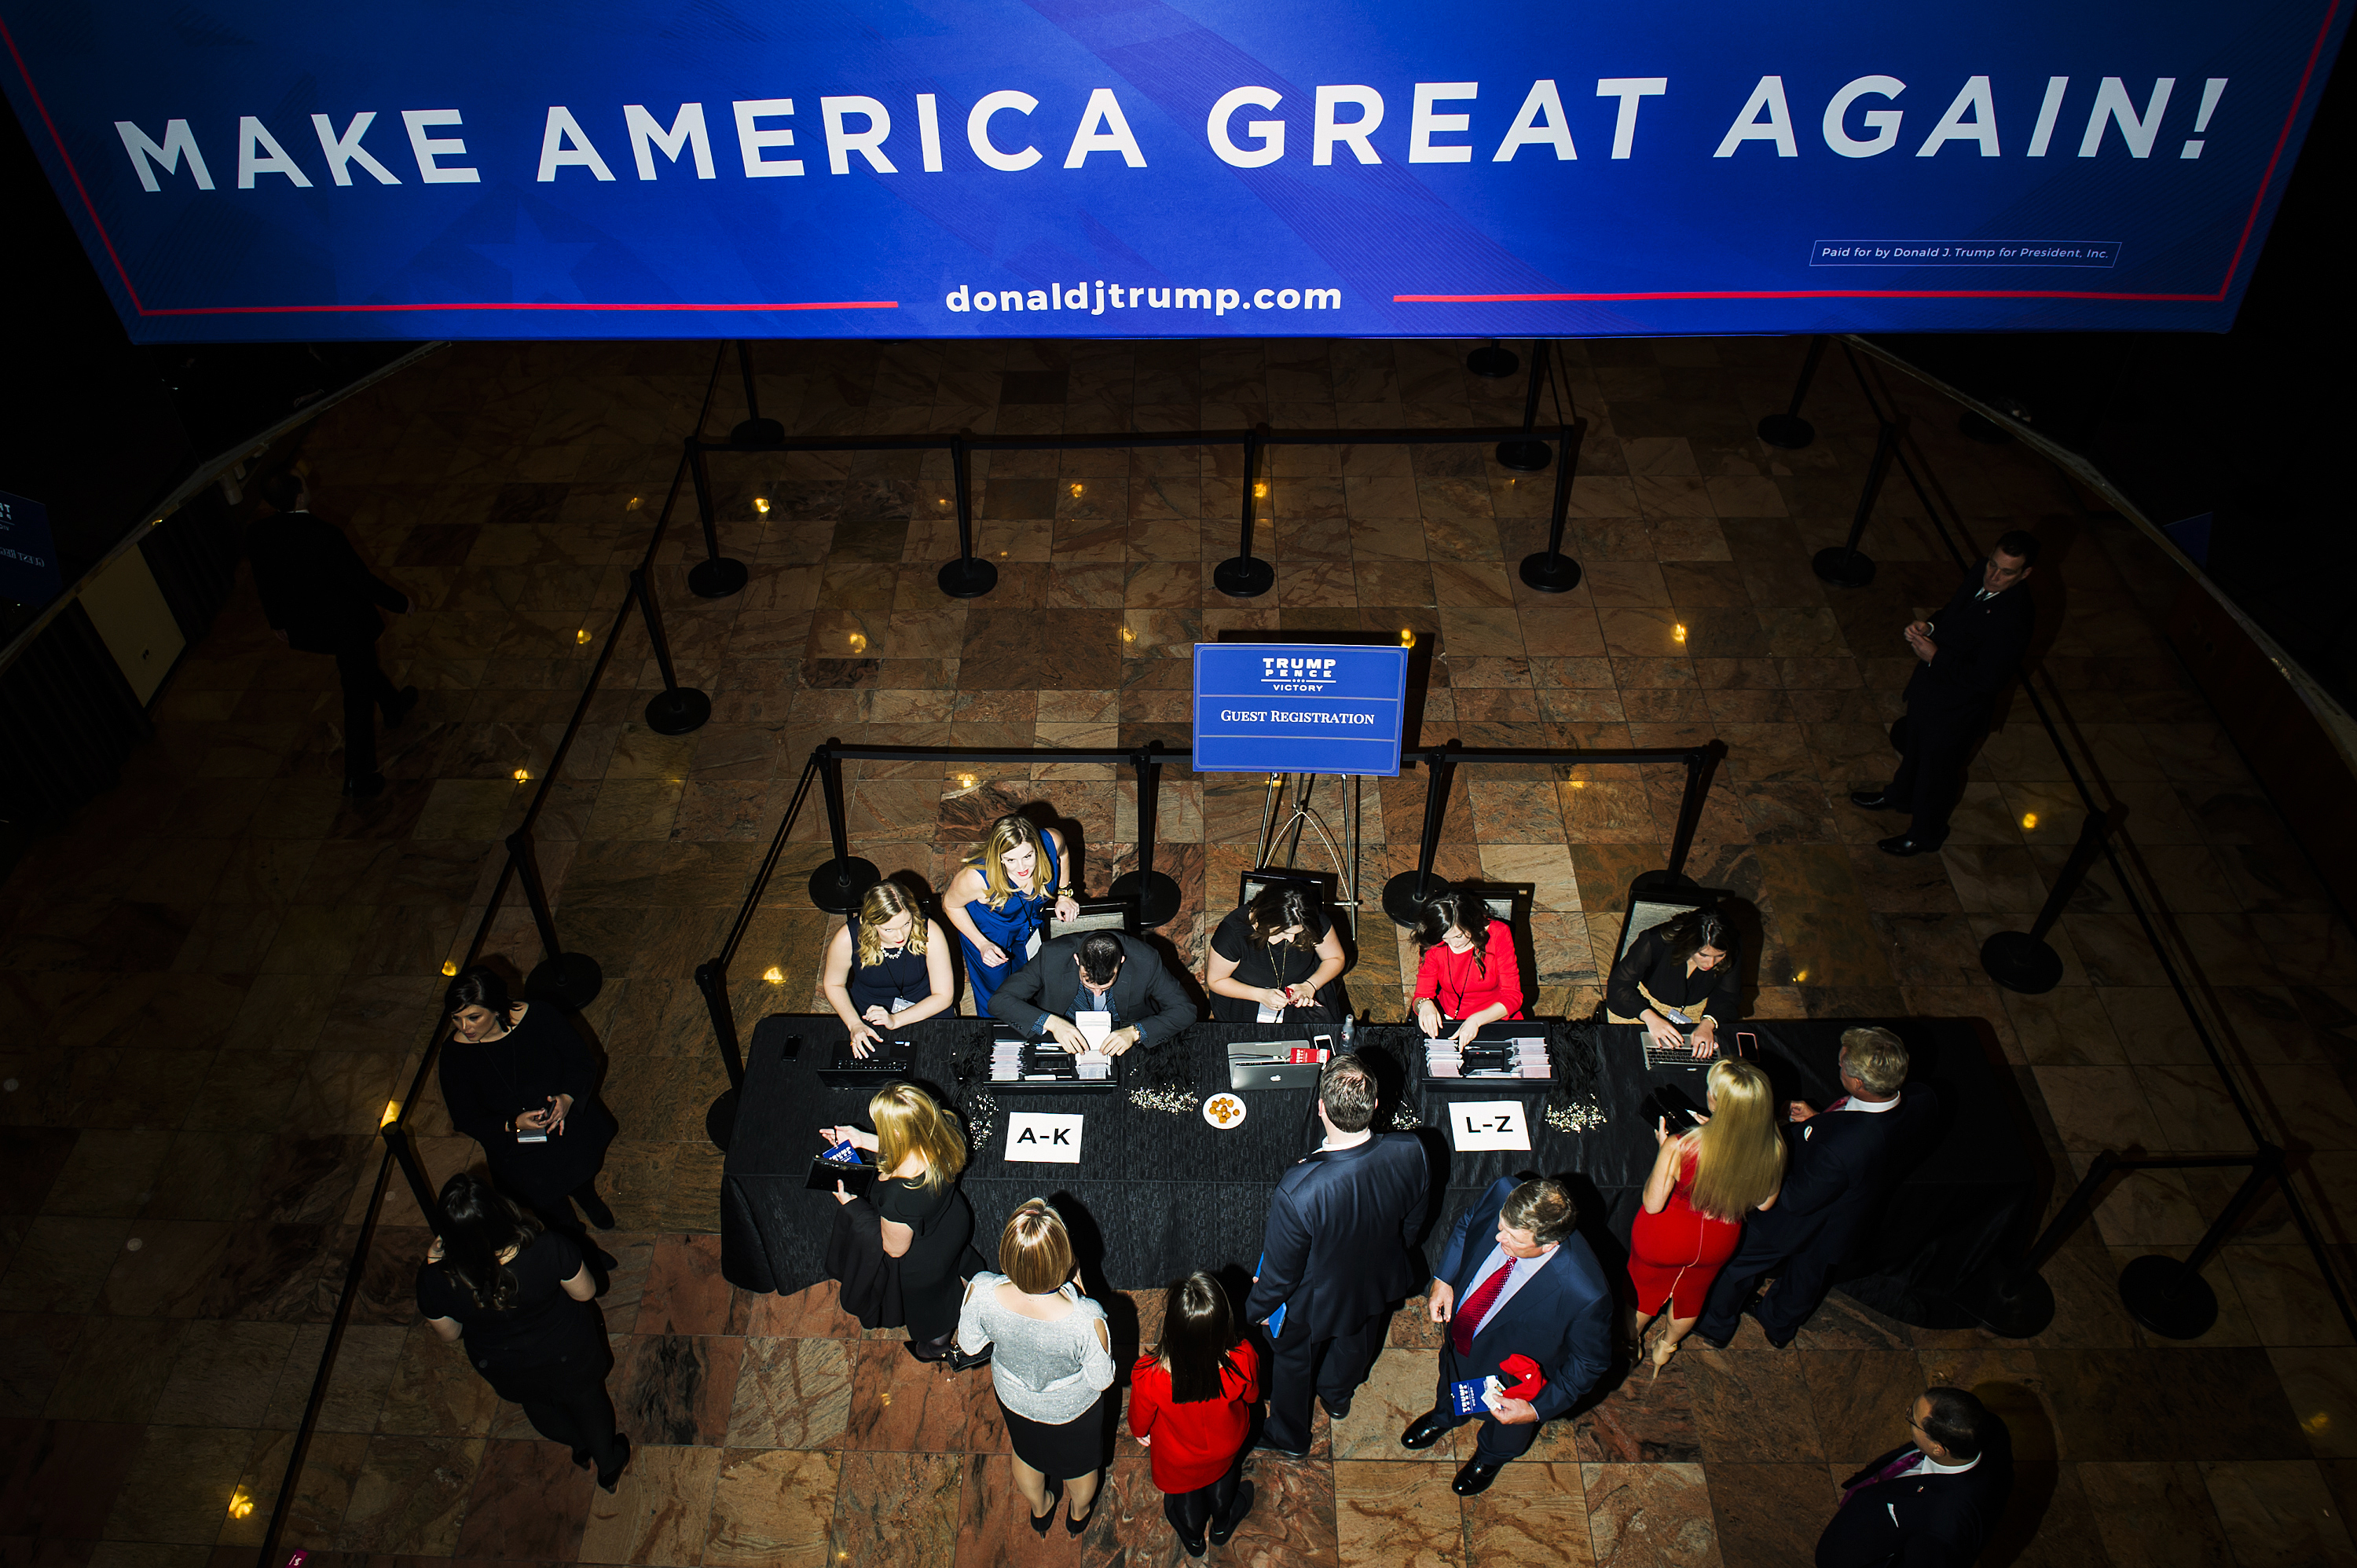 Guest register for an election party for Republican presidential candidate Donald Trump, Tuesday, Nov. 8, 2016 in New York's Manhattan borough. Trump faces Democratic nominee Hillary Clinton in the contest for president of the United States.